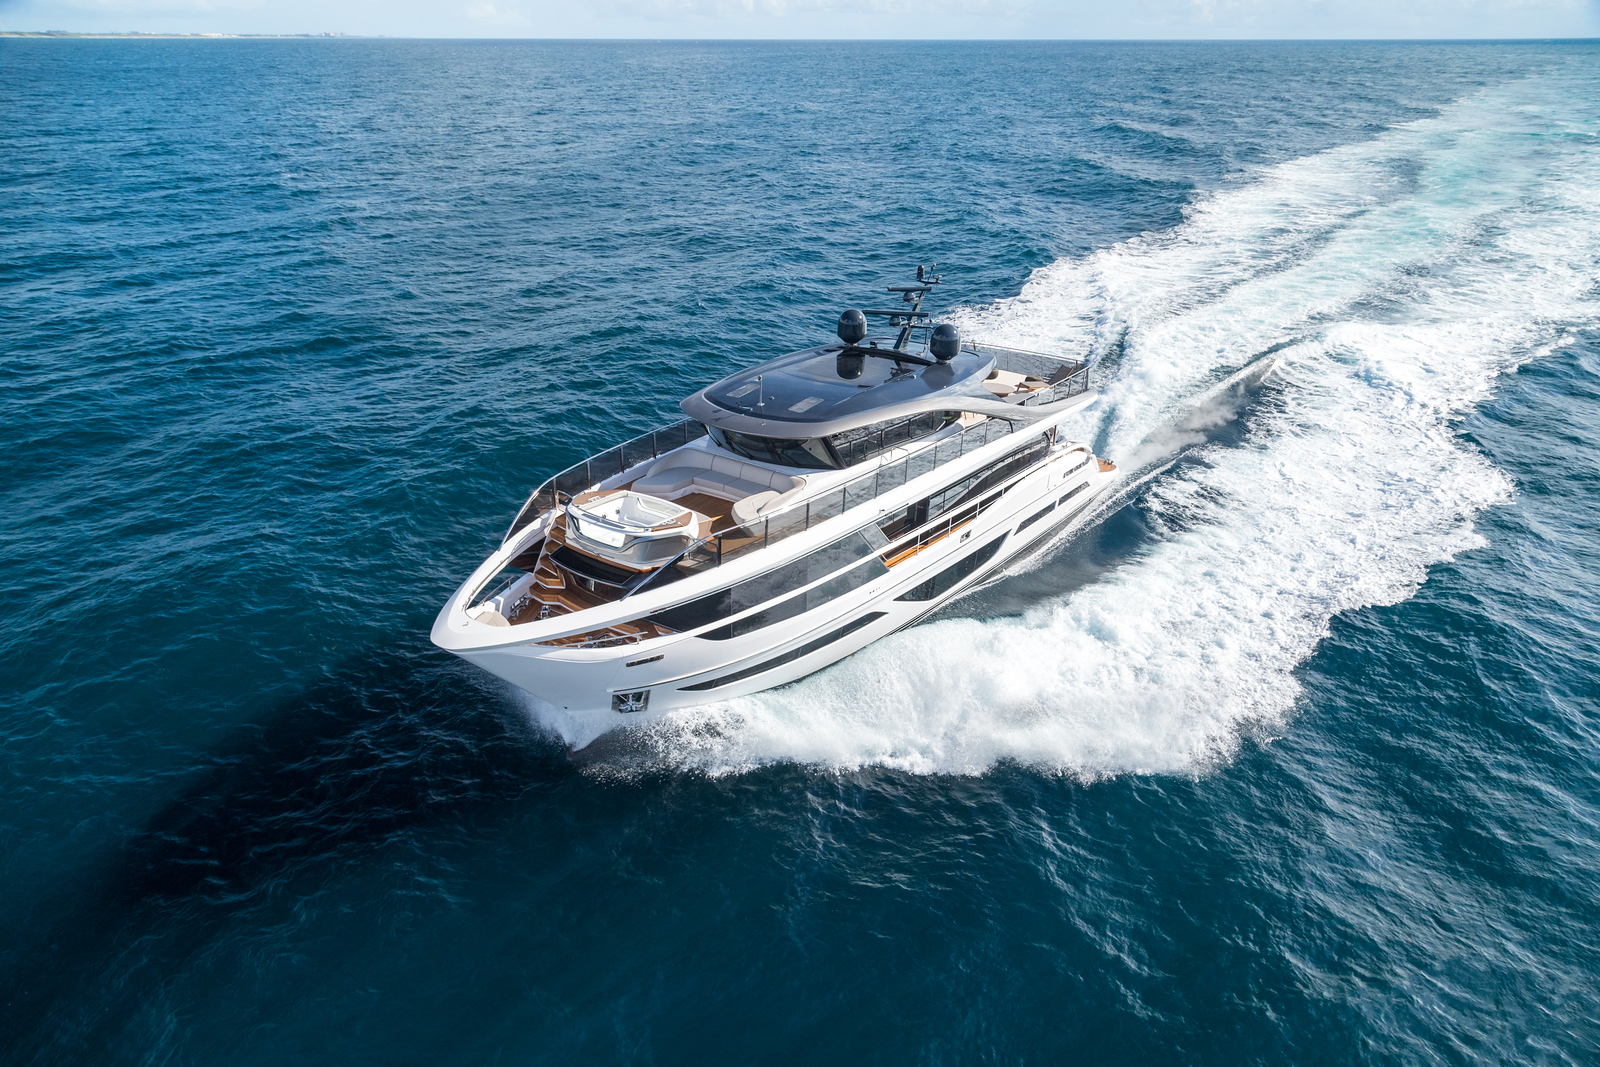 2023 princess superfly, newest addition to the largest fleet of luxury yachts in miami!